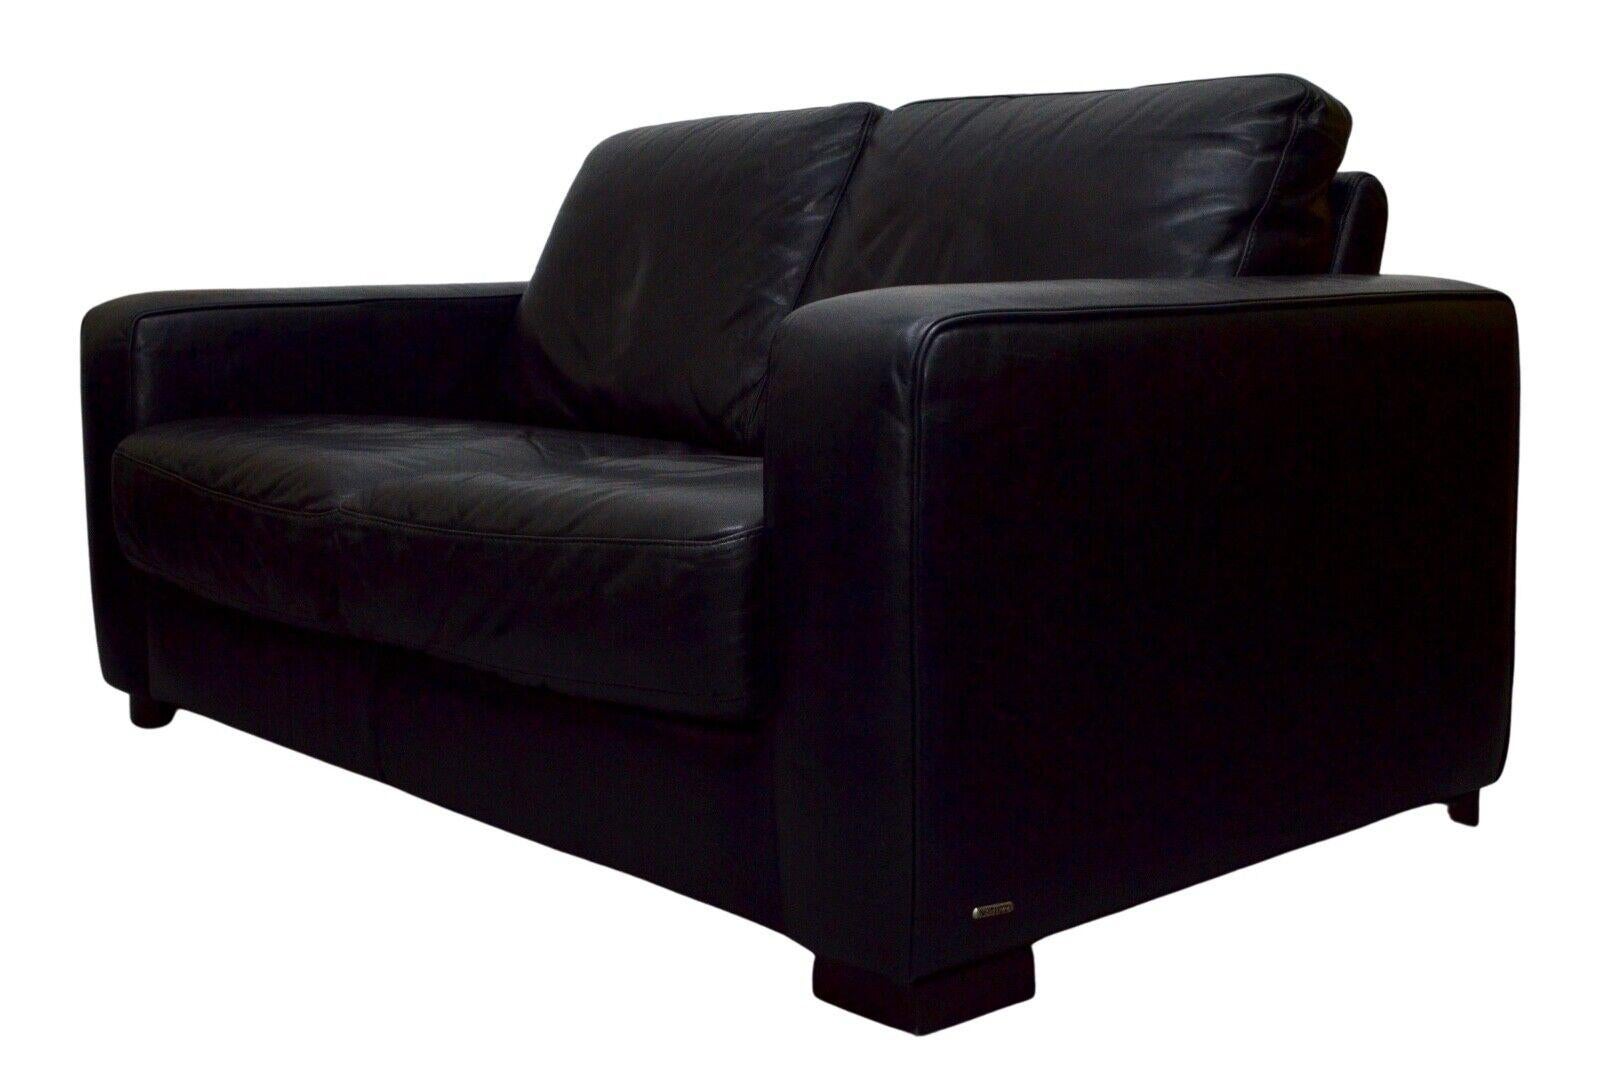 We are delighted to offer for sale this contemporary Natuzzi black leather two-seater sofa. Full of stylish details, this compact sofa is ideal even for small-size apartments. It is made from high-quality full-grain Italian leather and a hardwood